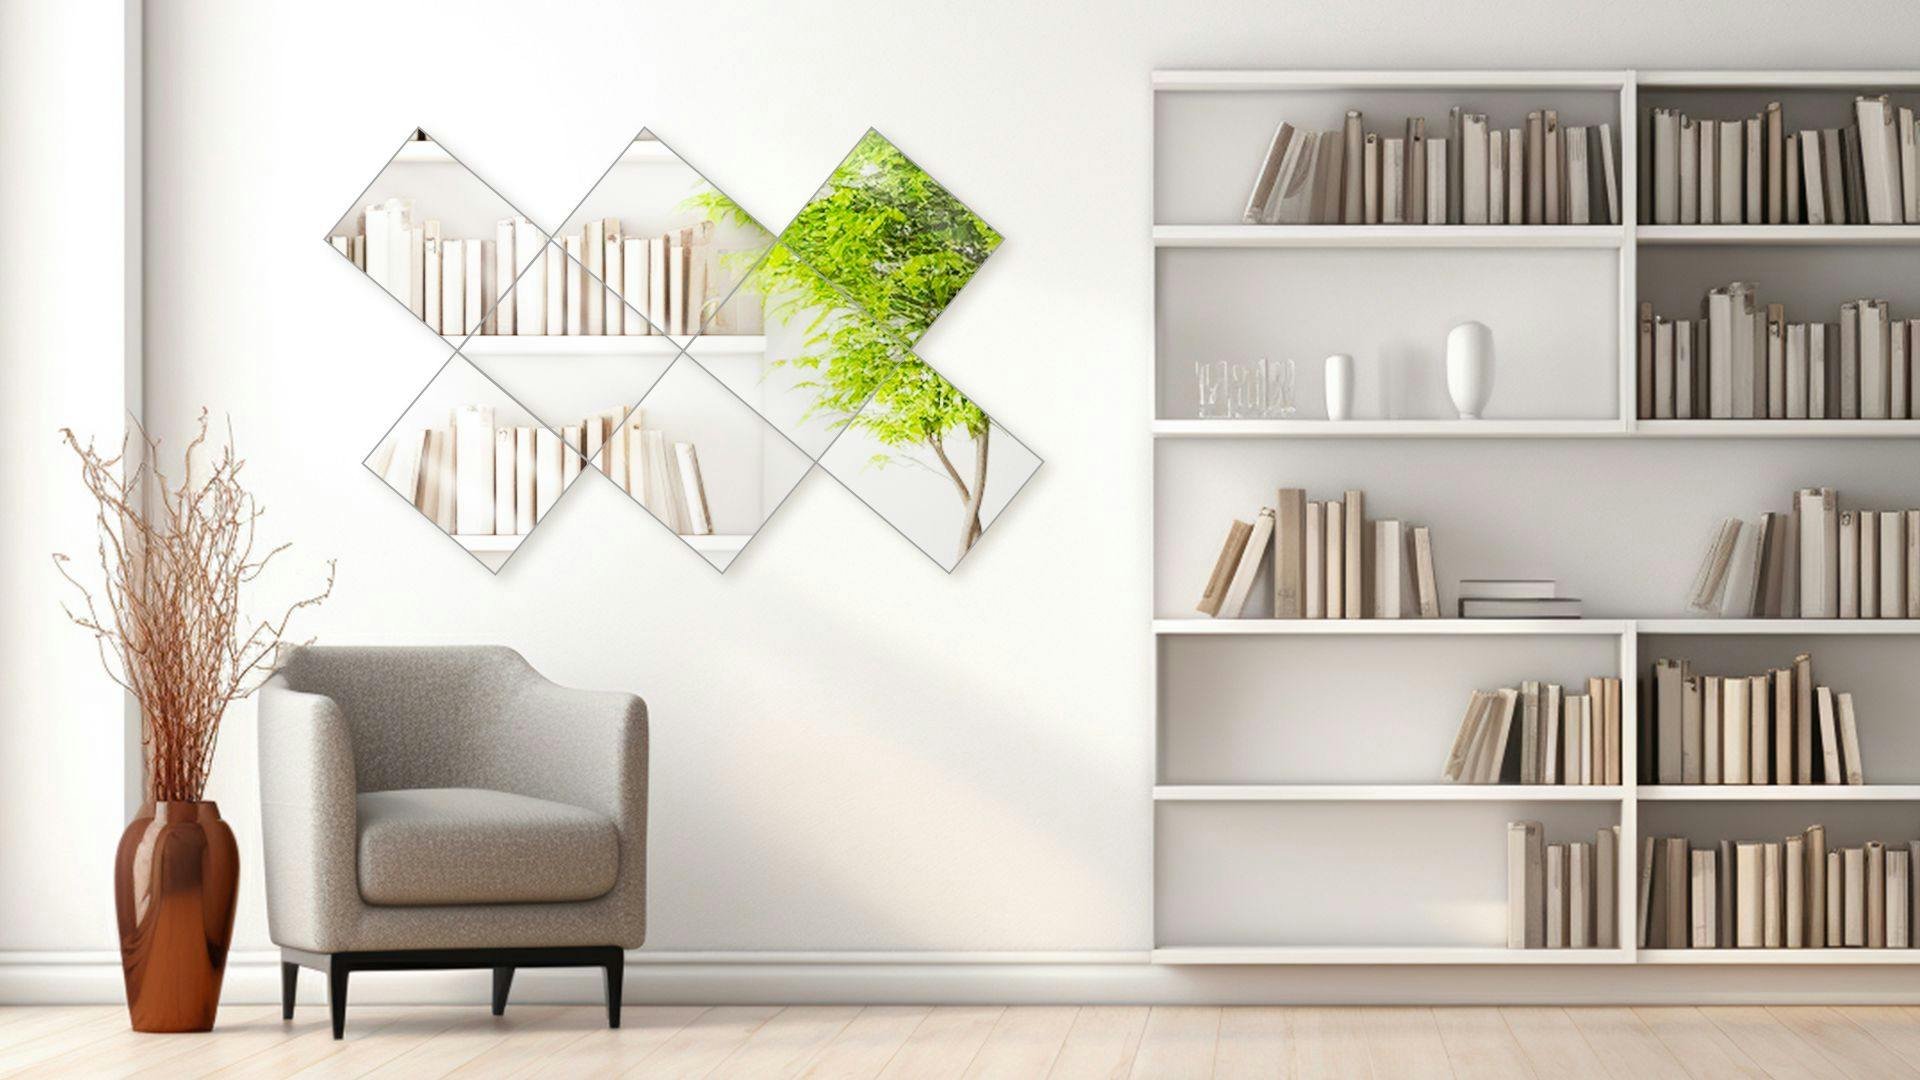 Foyer wall adorned with mirror tiles next to a book shelf